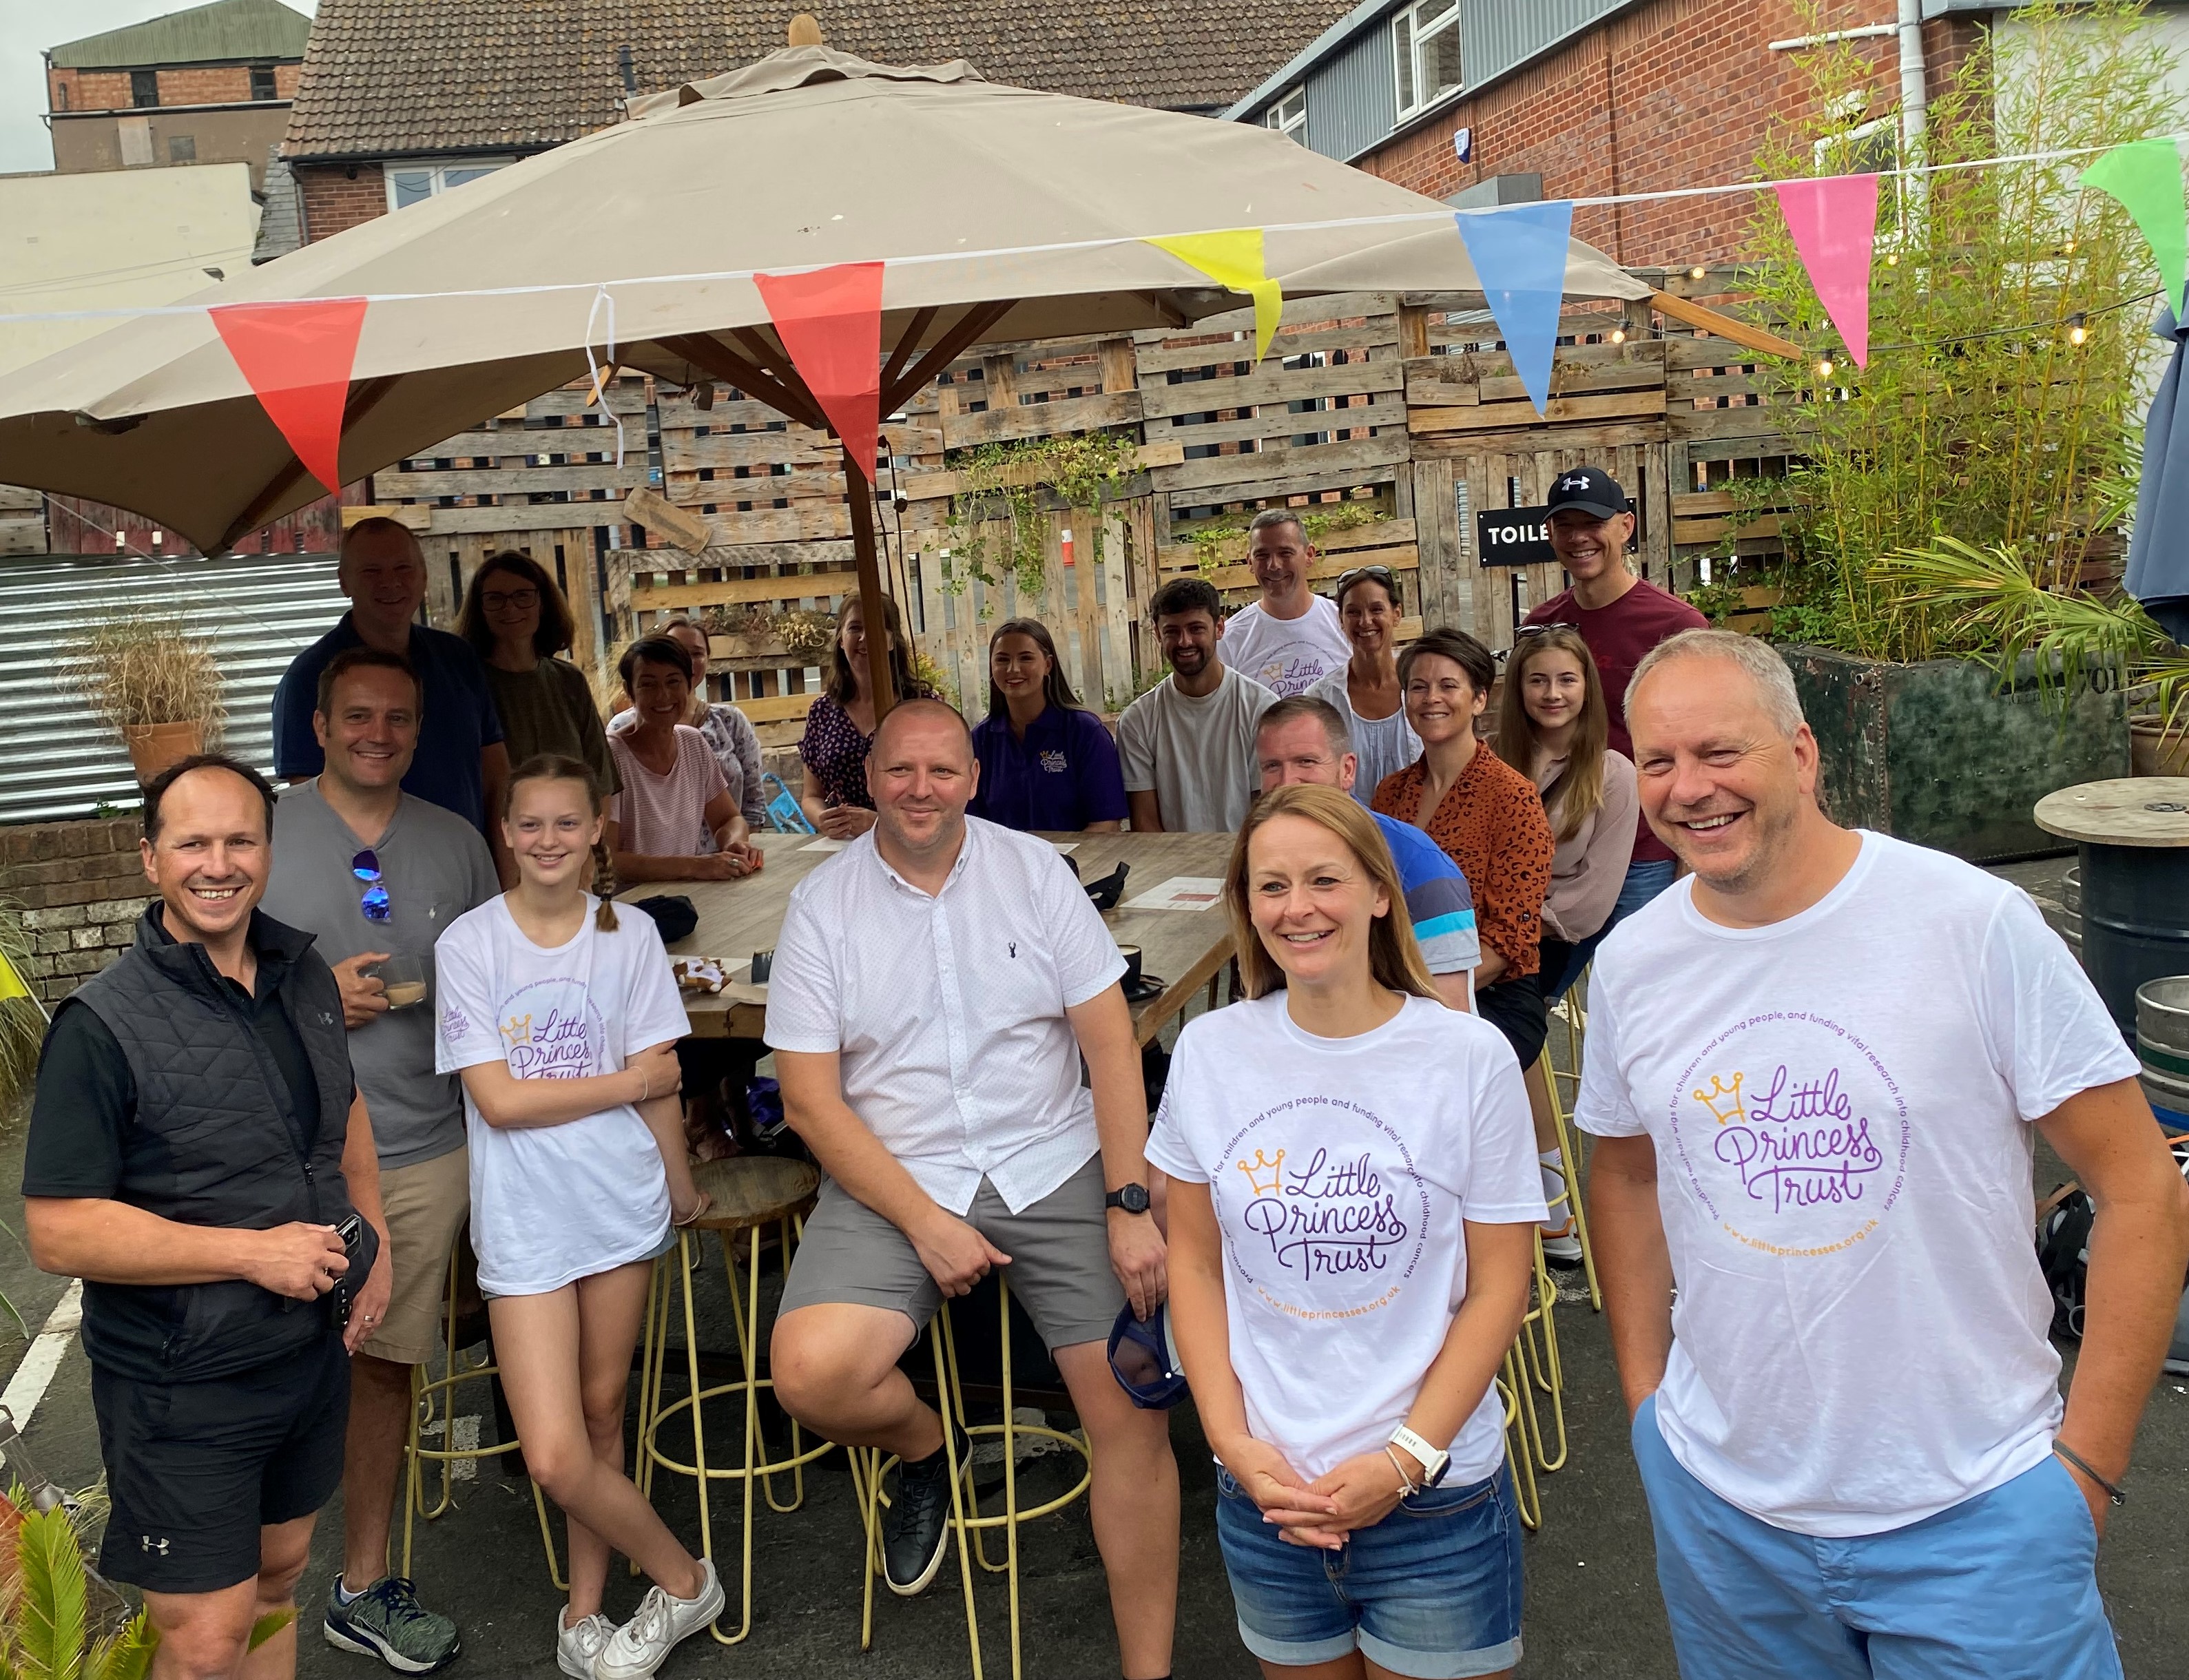 Little Princess Trust riders and supporters met up at The Yard in Hereford this morning before making their way to Hampton Court in London. They will begin their three-day ride to Paris at 5am tomorrow.